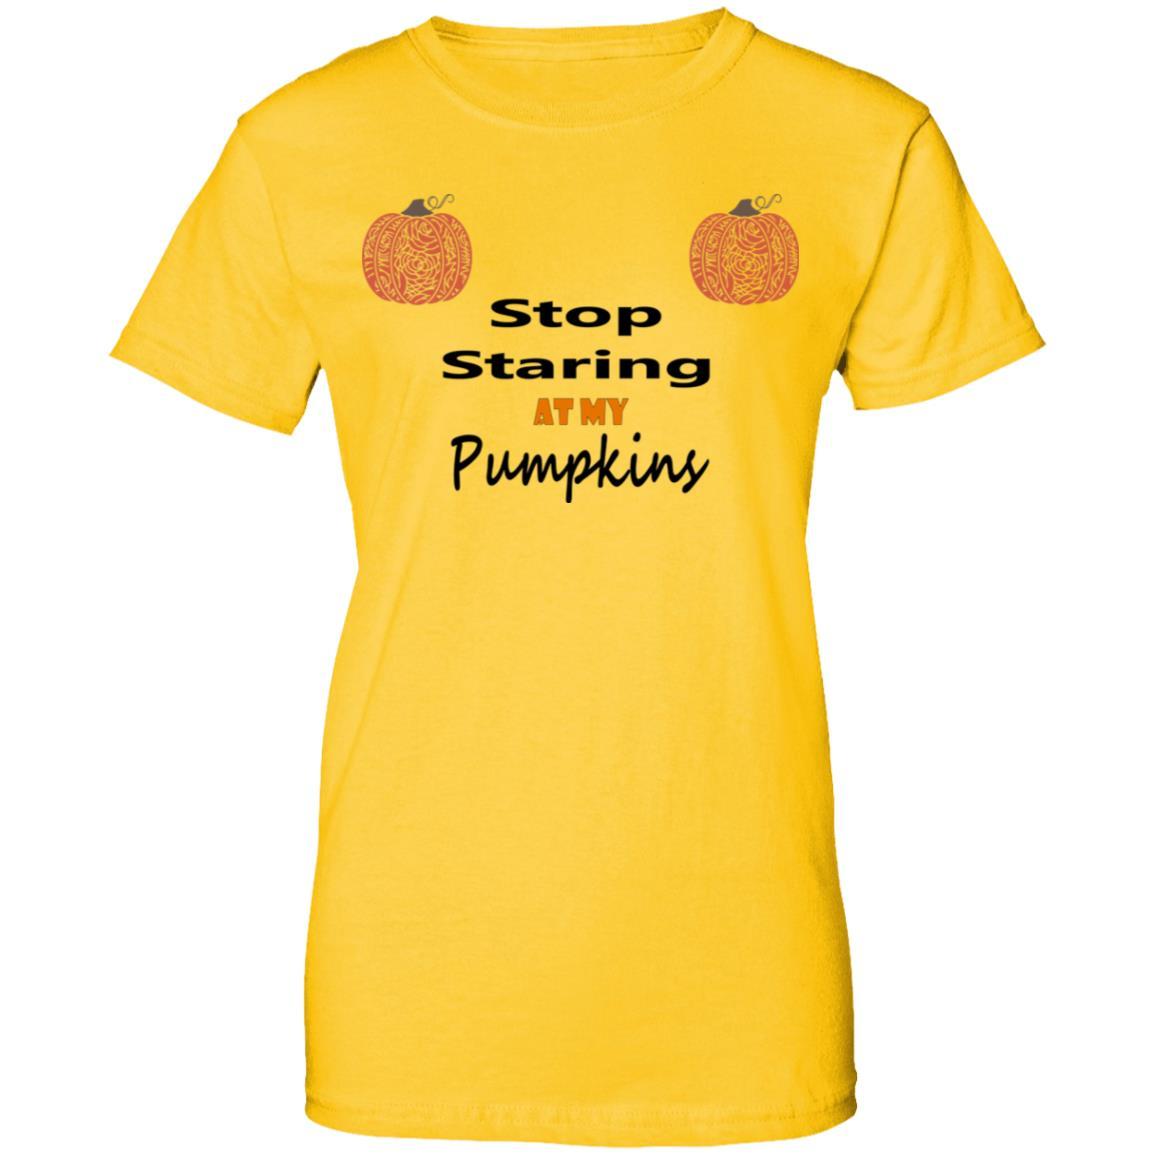 T-Shirts Daisy / X-Small WineyBitches.Co "Stop Staring At My Pumpkins" Ladies' 100% Cotton T-Shirt WineyBitchesCo